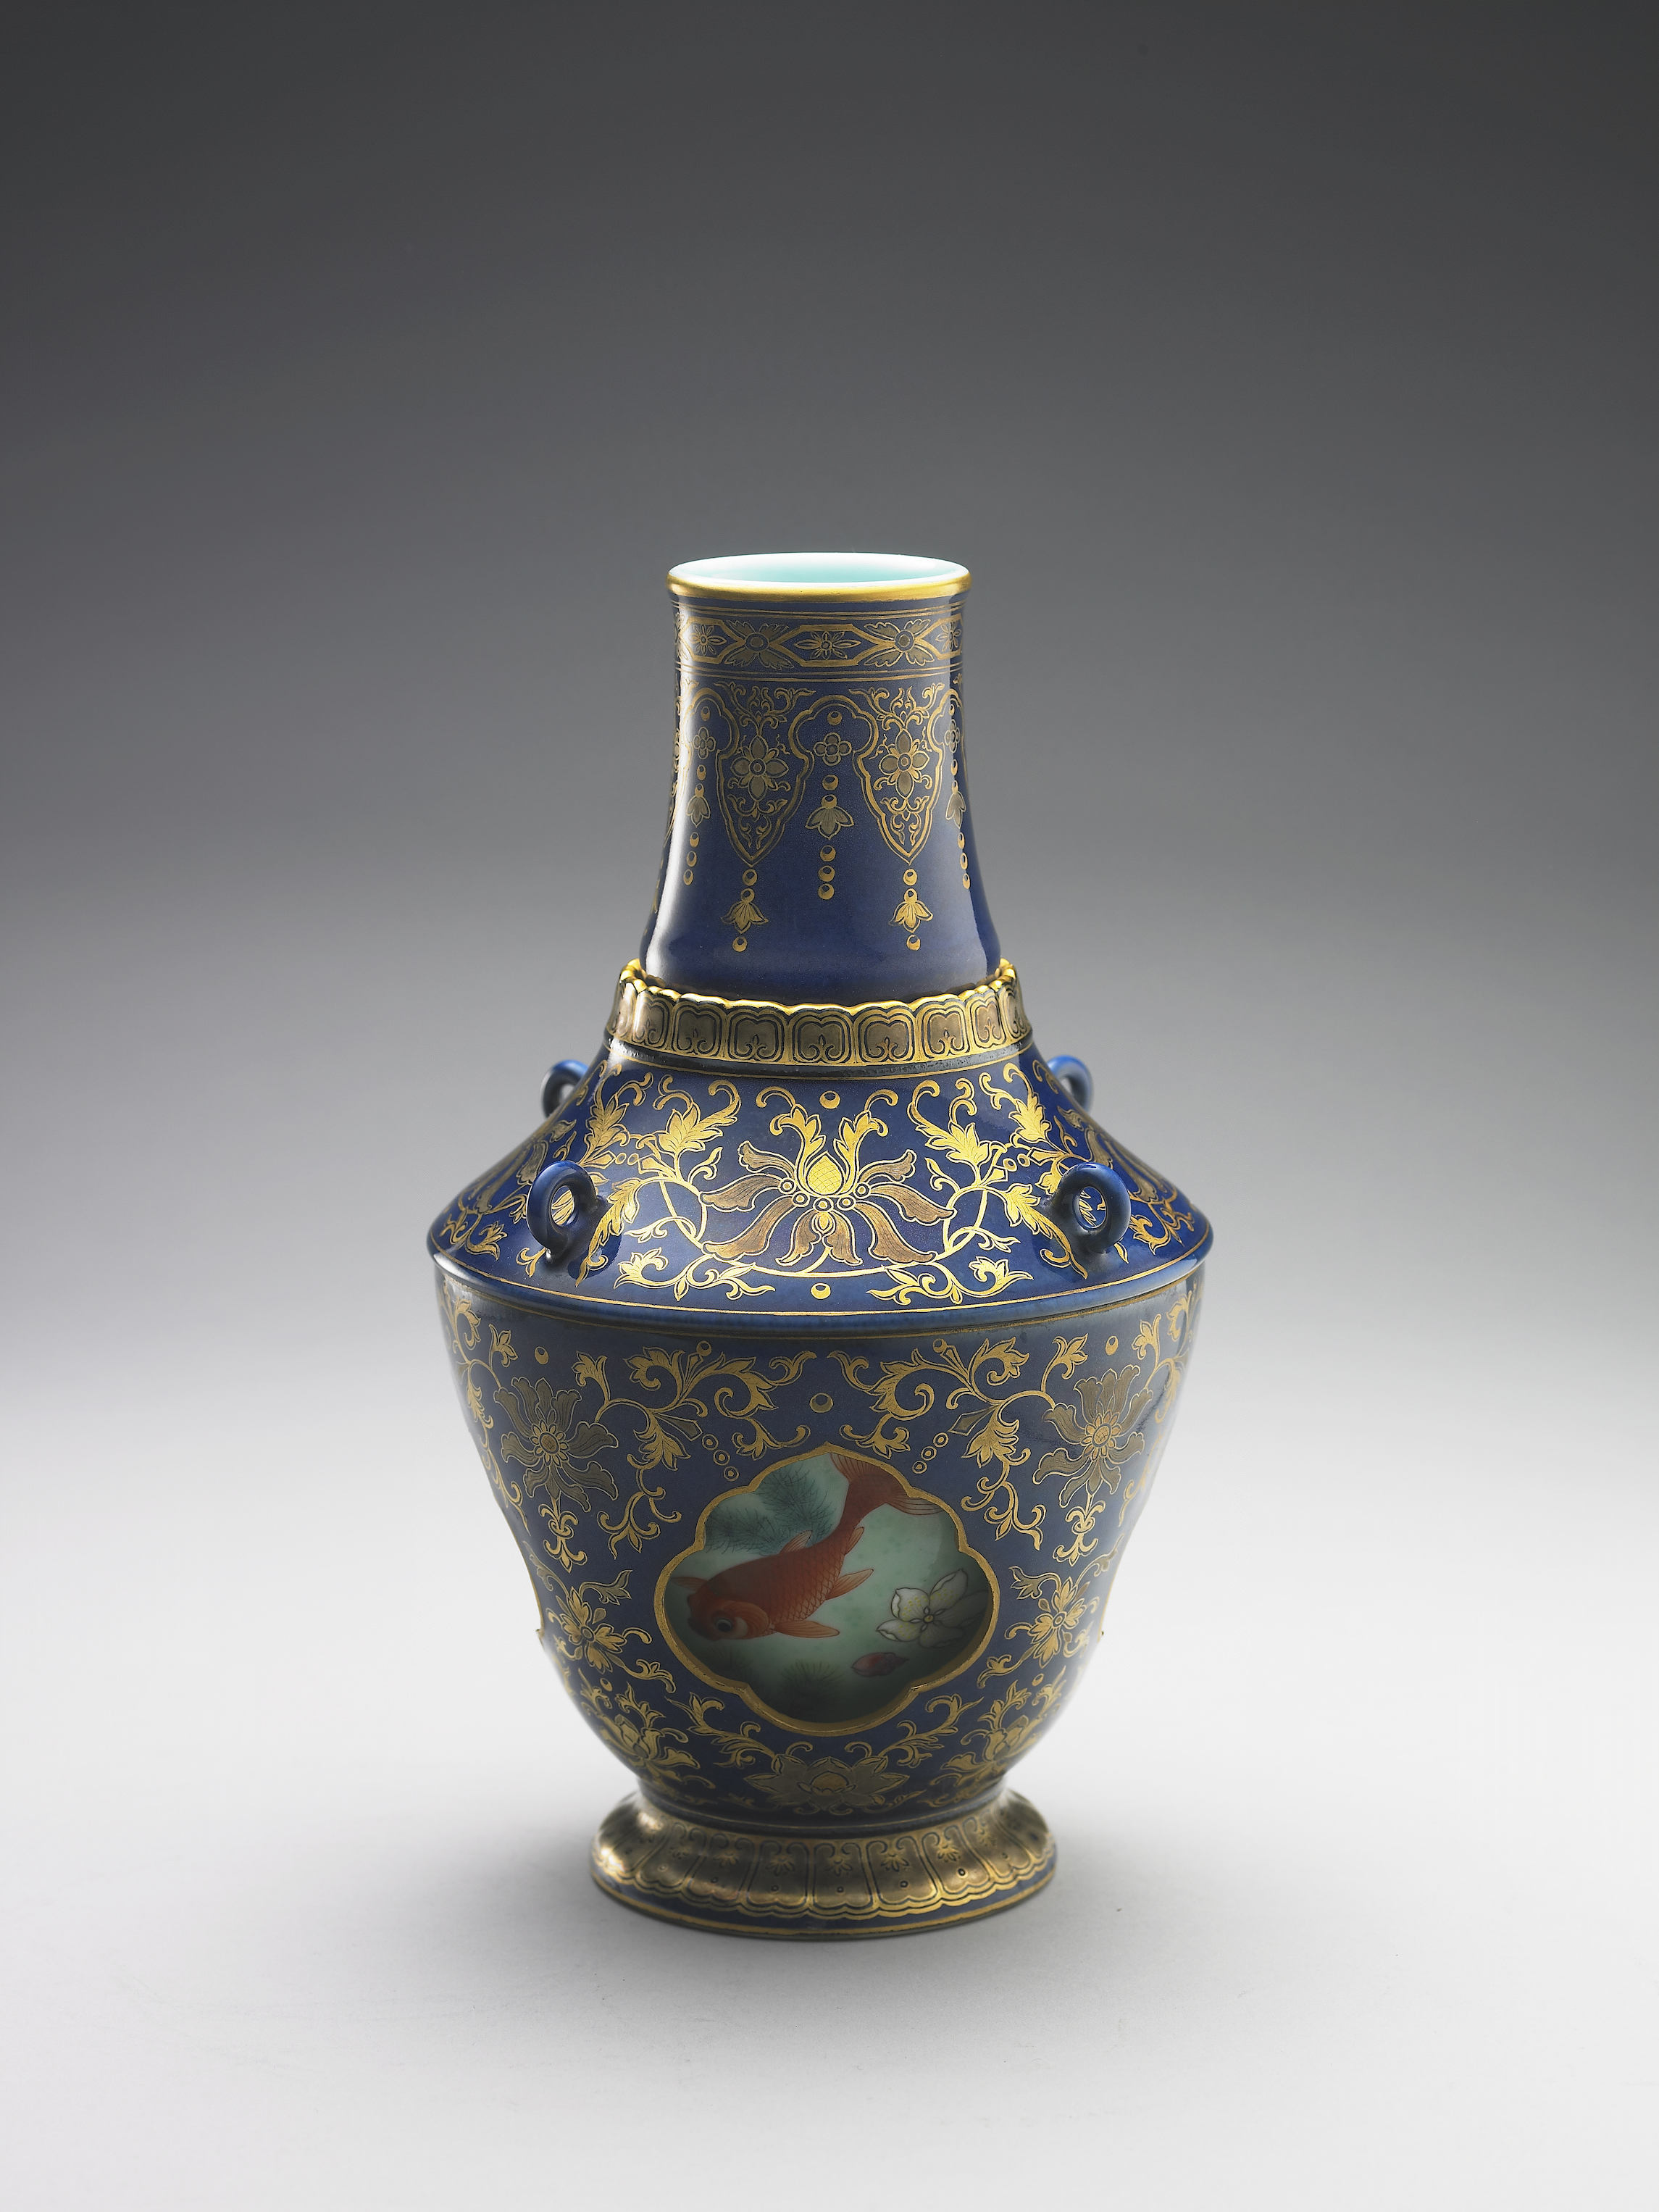 Ceramics in National Palace Museum, Qianlong reign (1736-1795), Qing dynasty